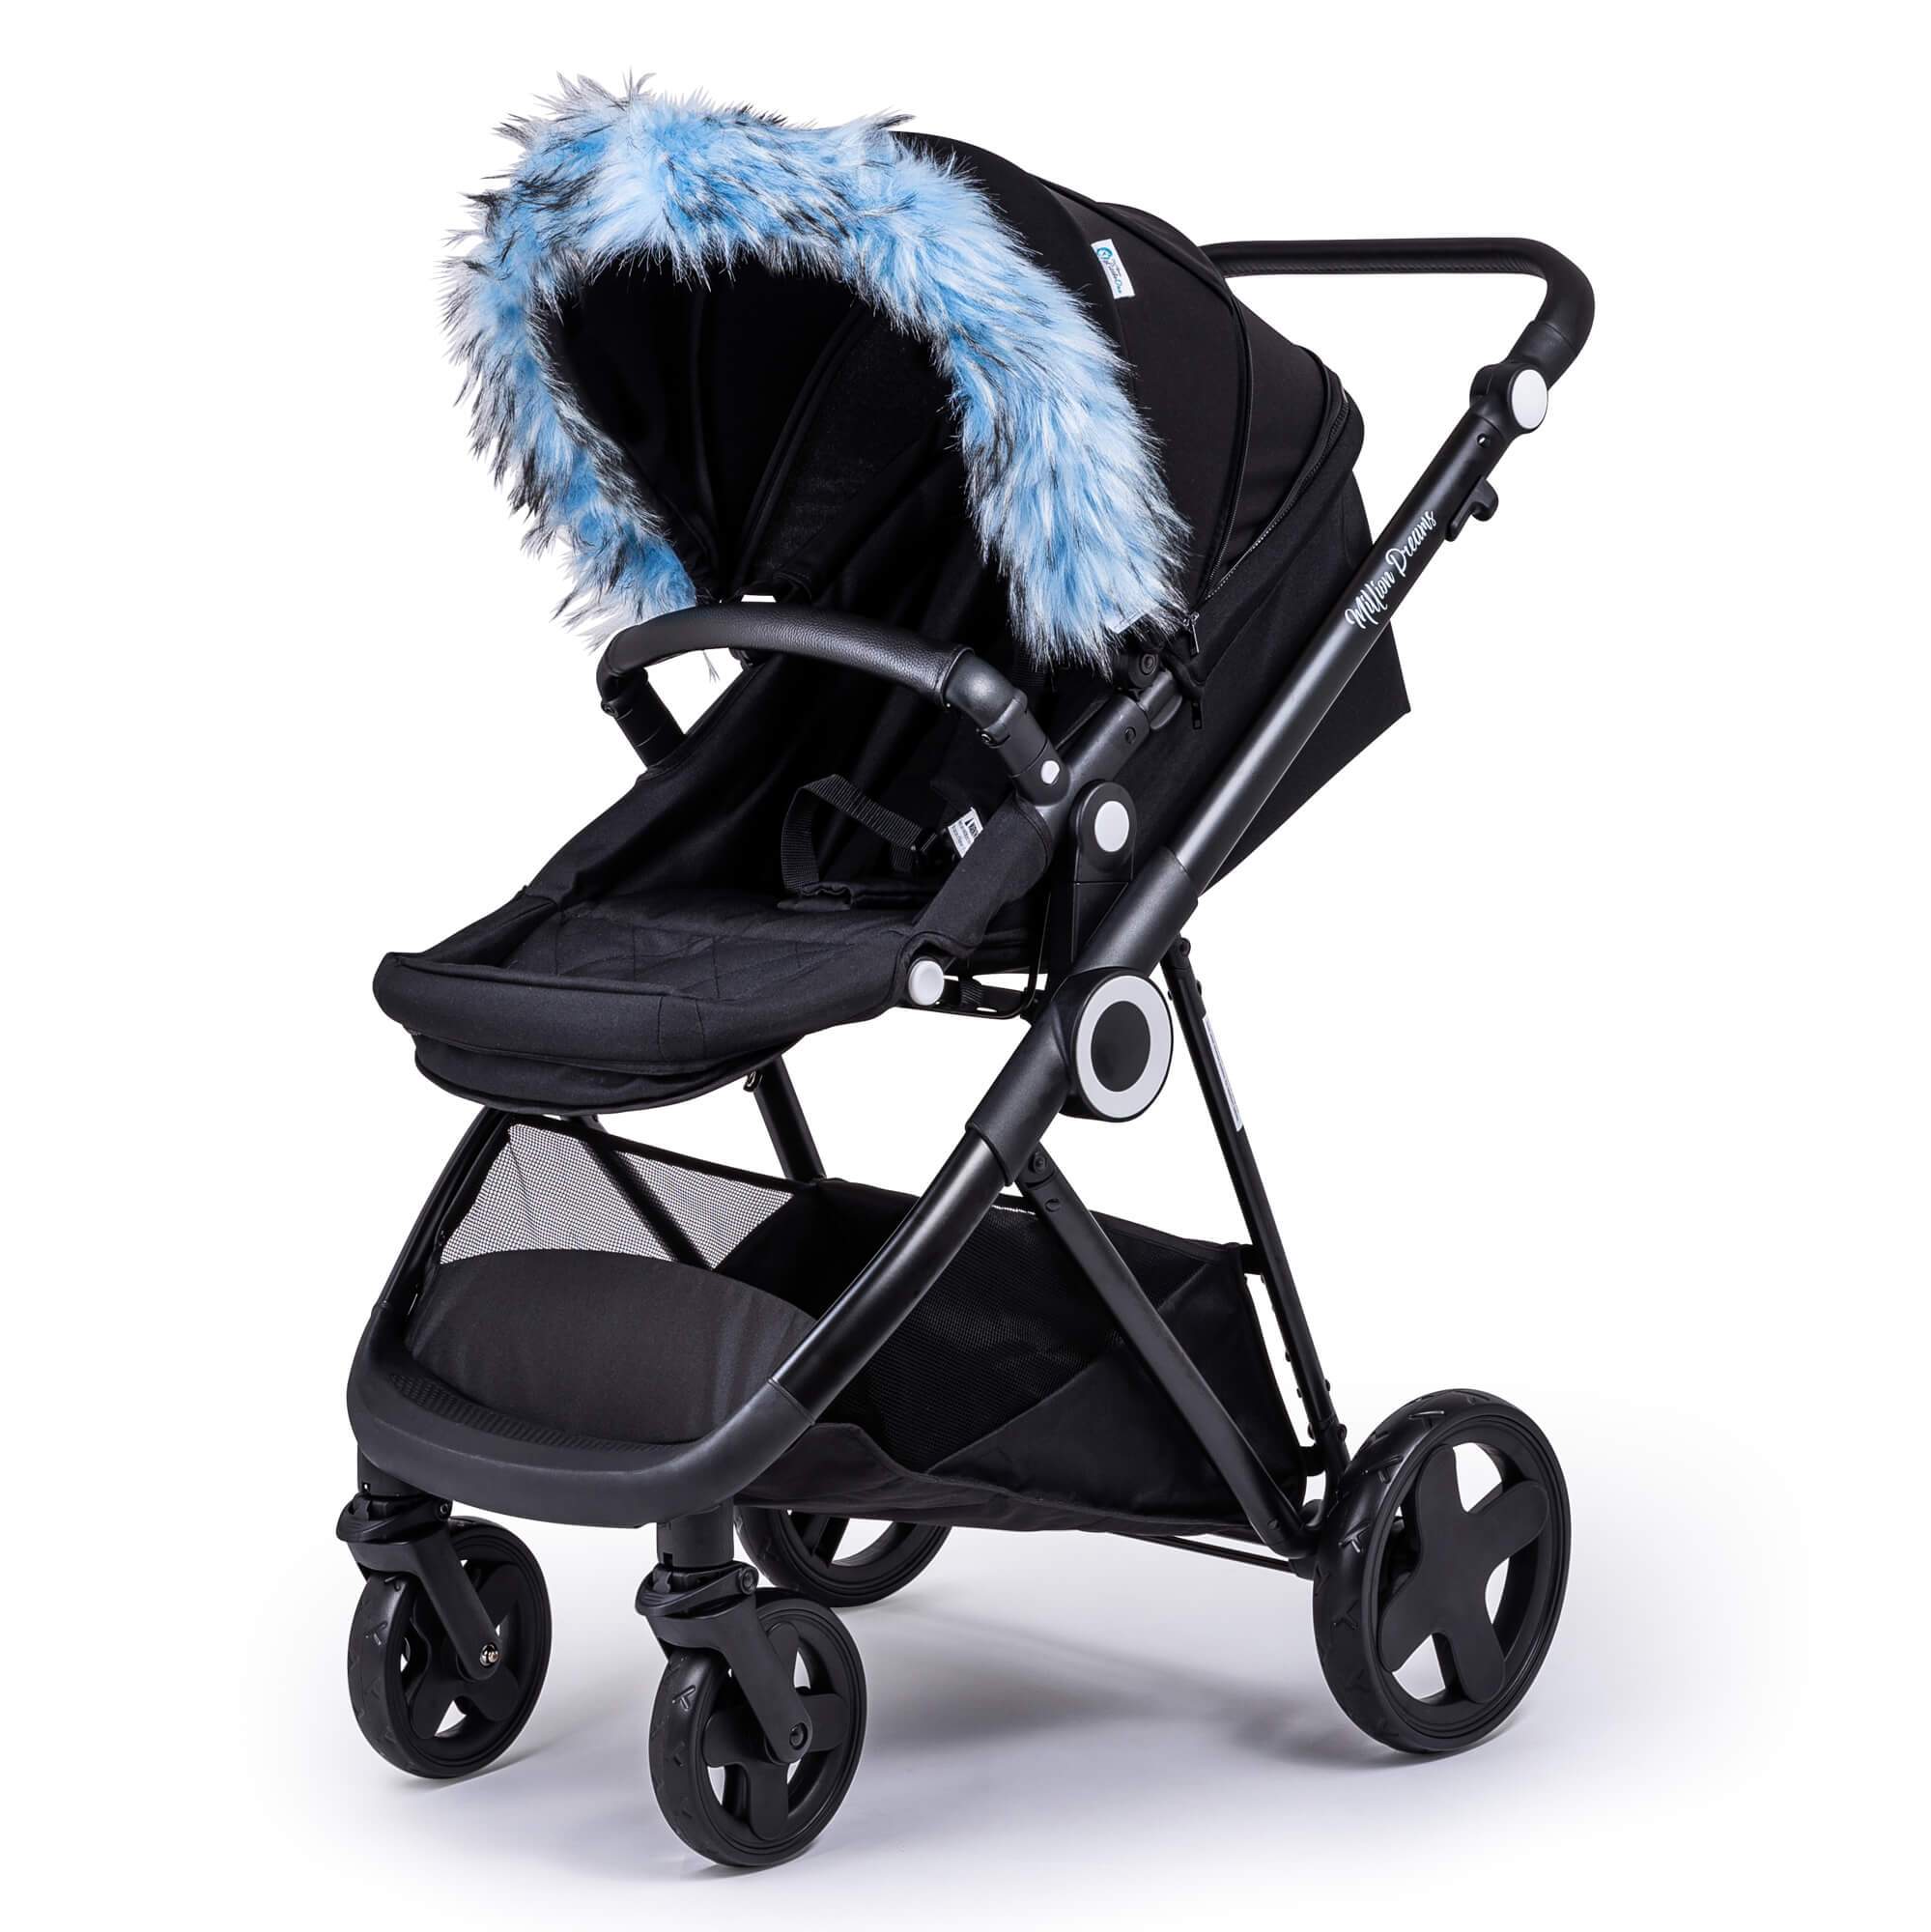 Pram Fur Hood Trim Attachment For Pushchair Compatible with Nuna - Light Blue / Fits All Models | For Your Little One